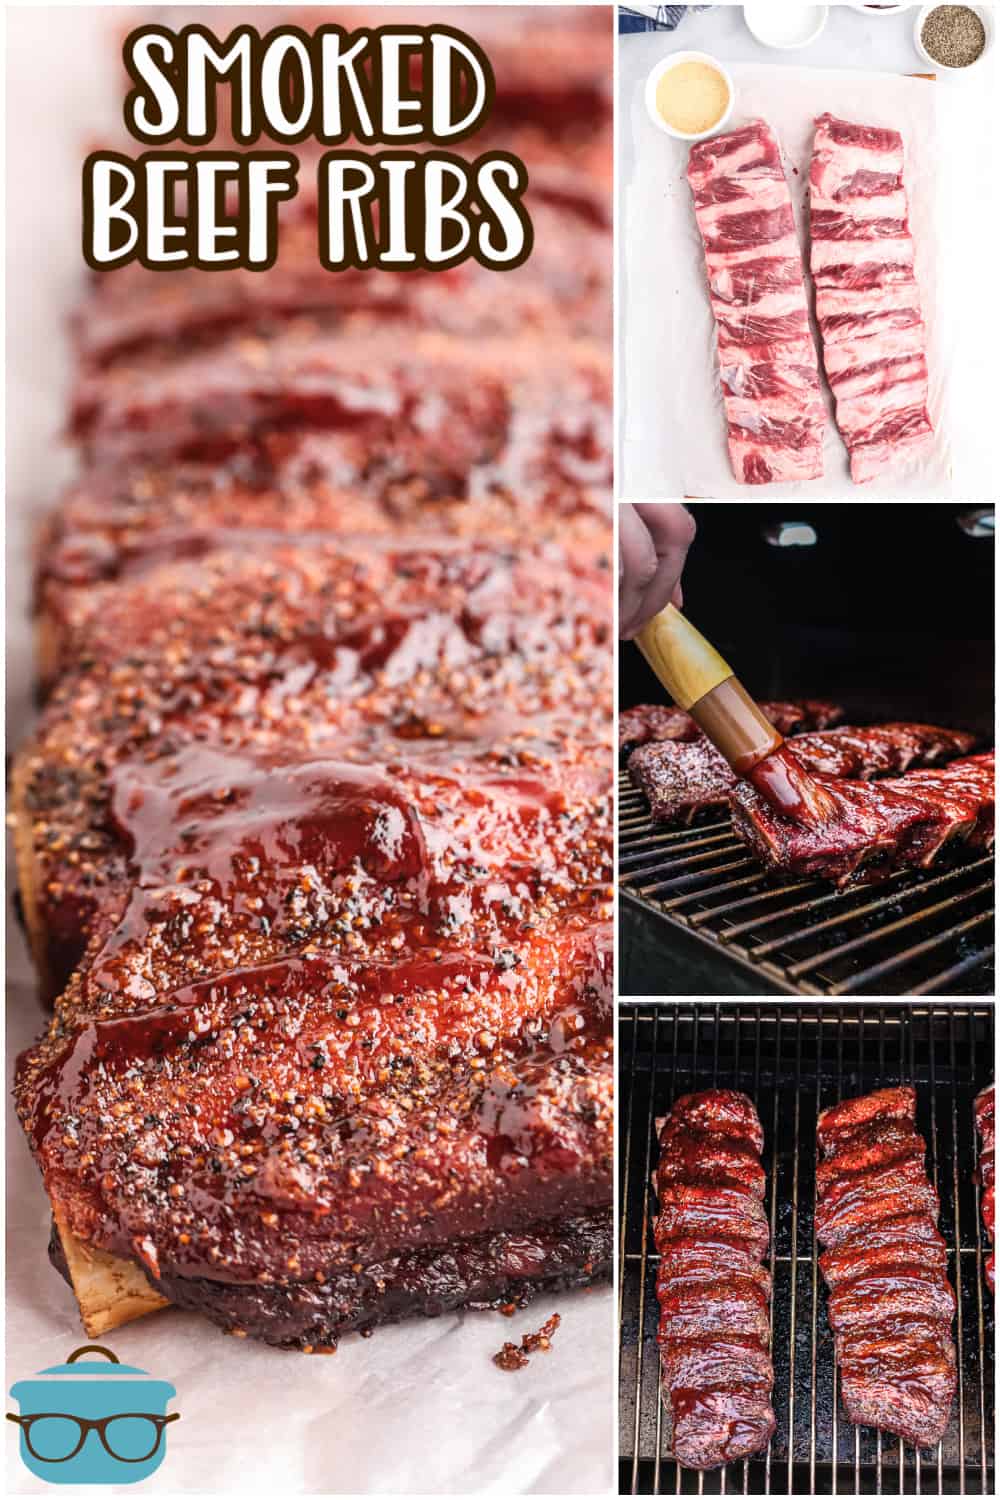 Smoked Beef Ribs recipe from The Country Cook, collage photo showing the rib smoking process and a final photo of the completed cooked ribs.